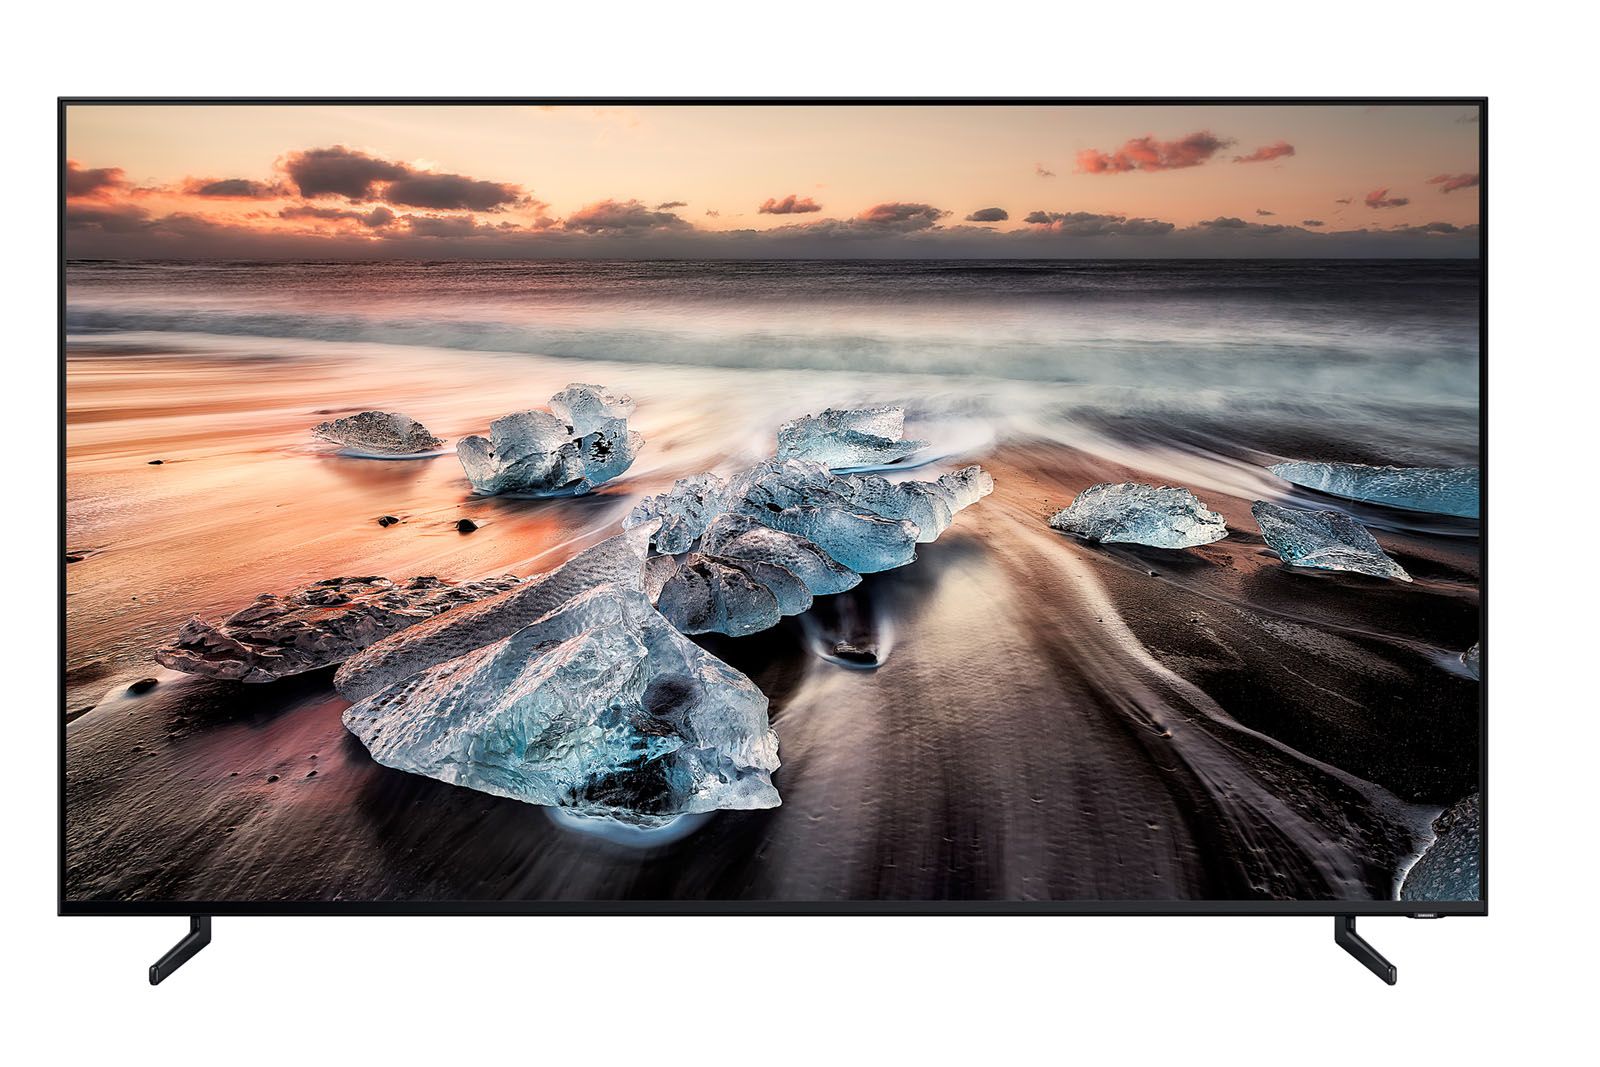 Samsung 8K TV prices revealed this is how much the future costs image 1